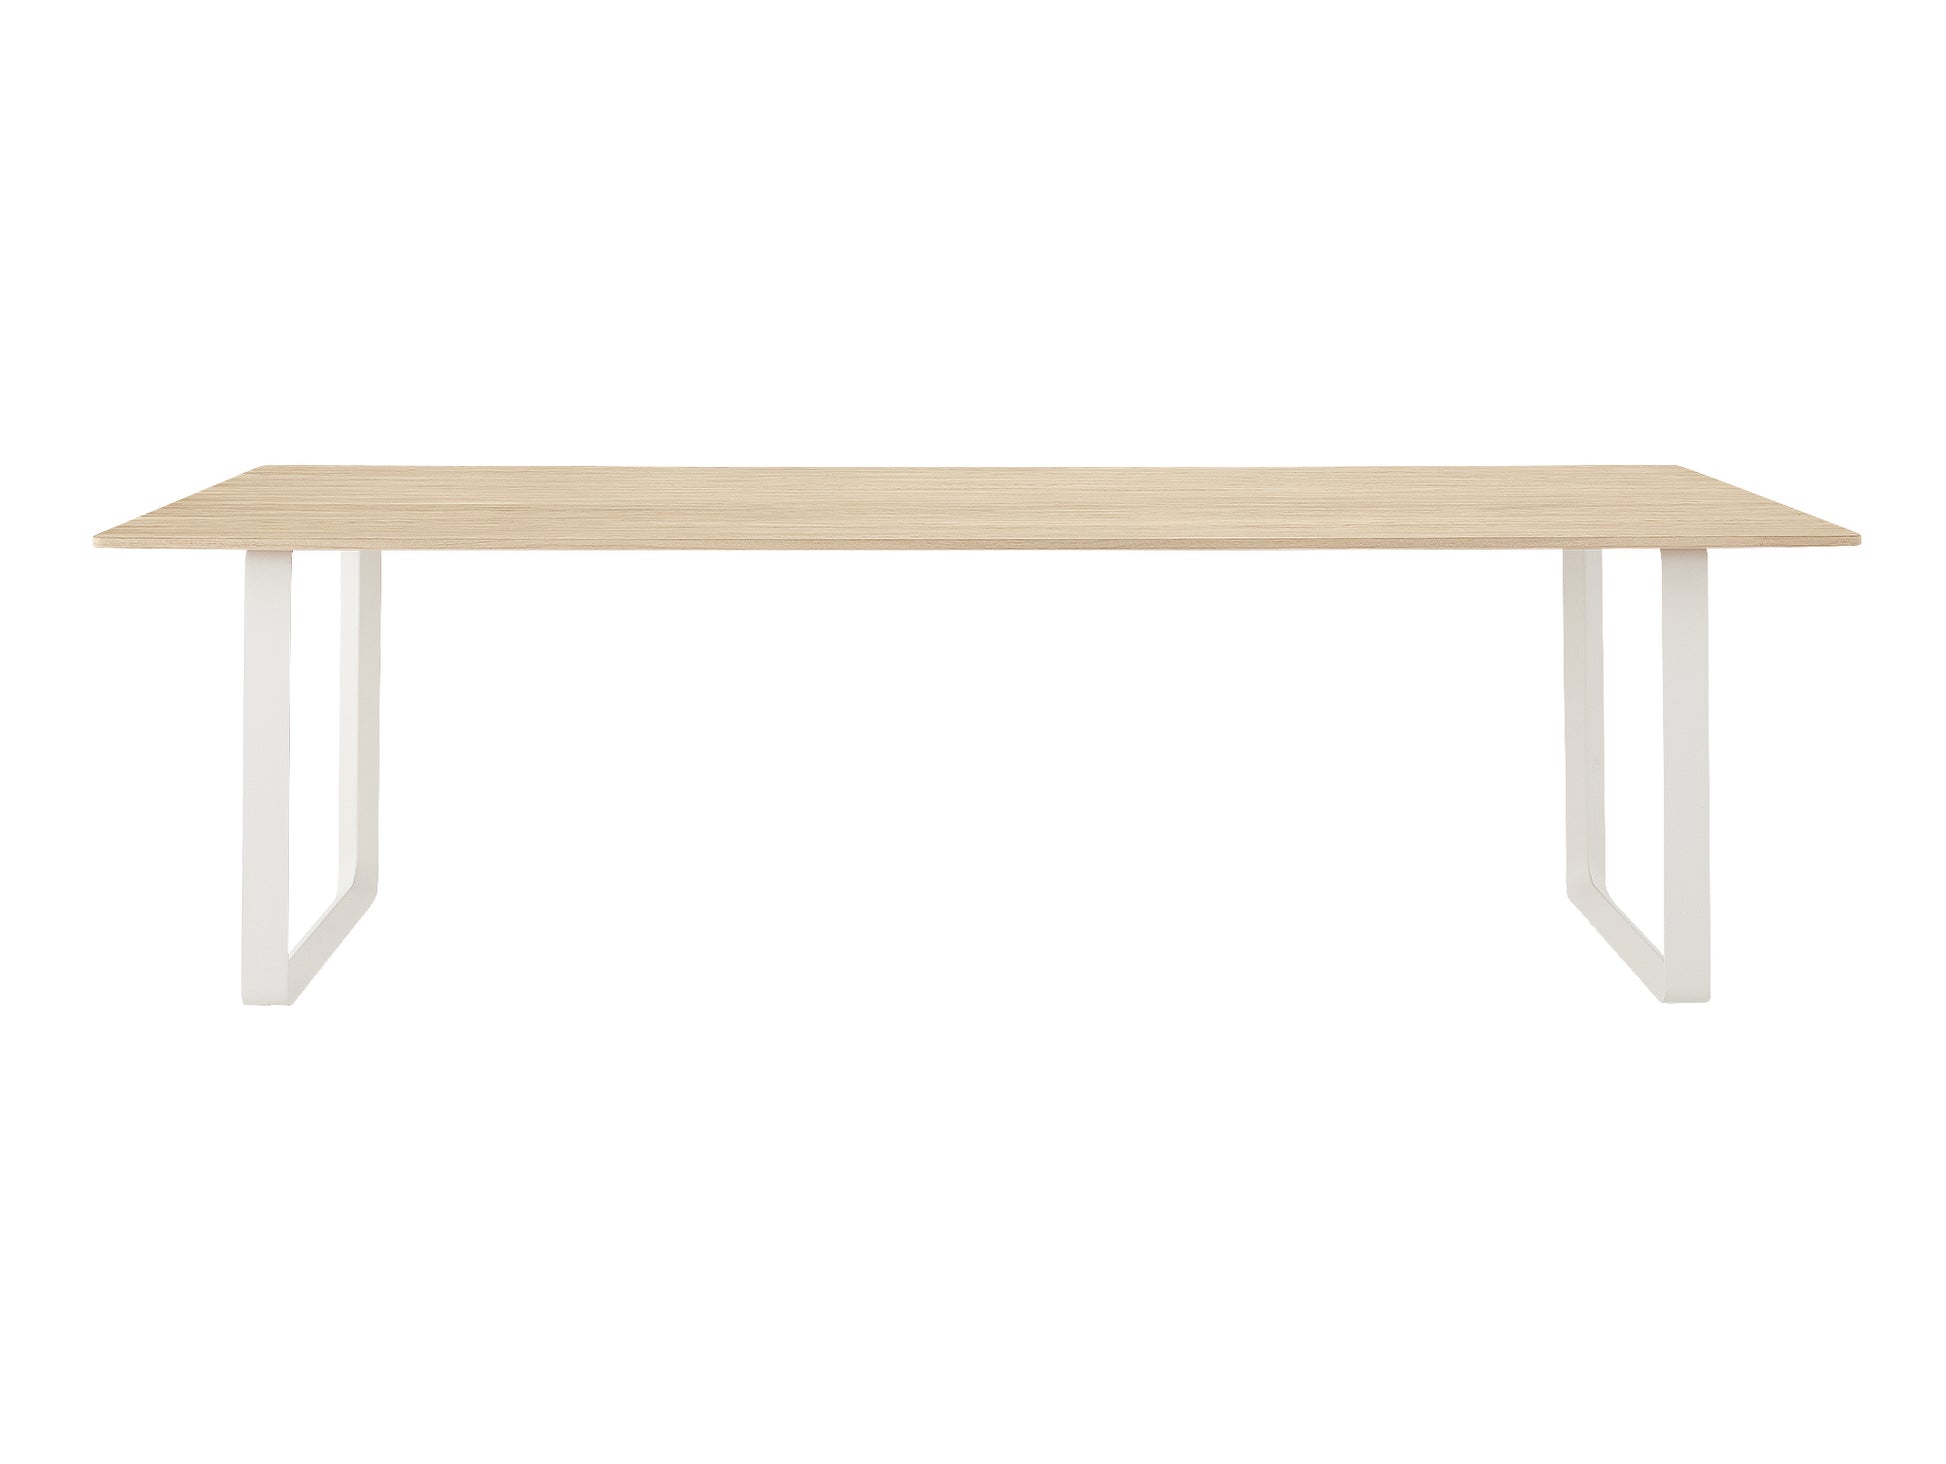 70/70 Table - Solid Oak Table Top with White Base / 225 x 108 cm